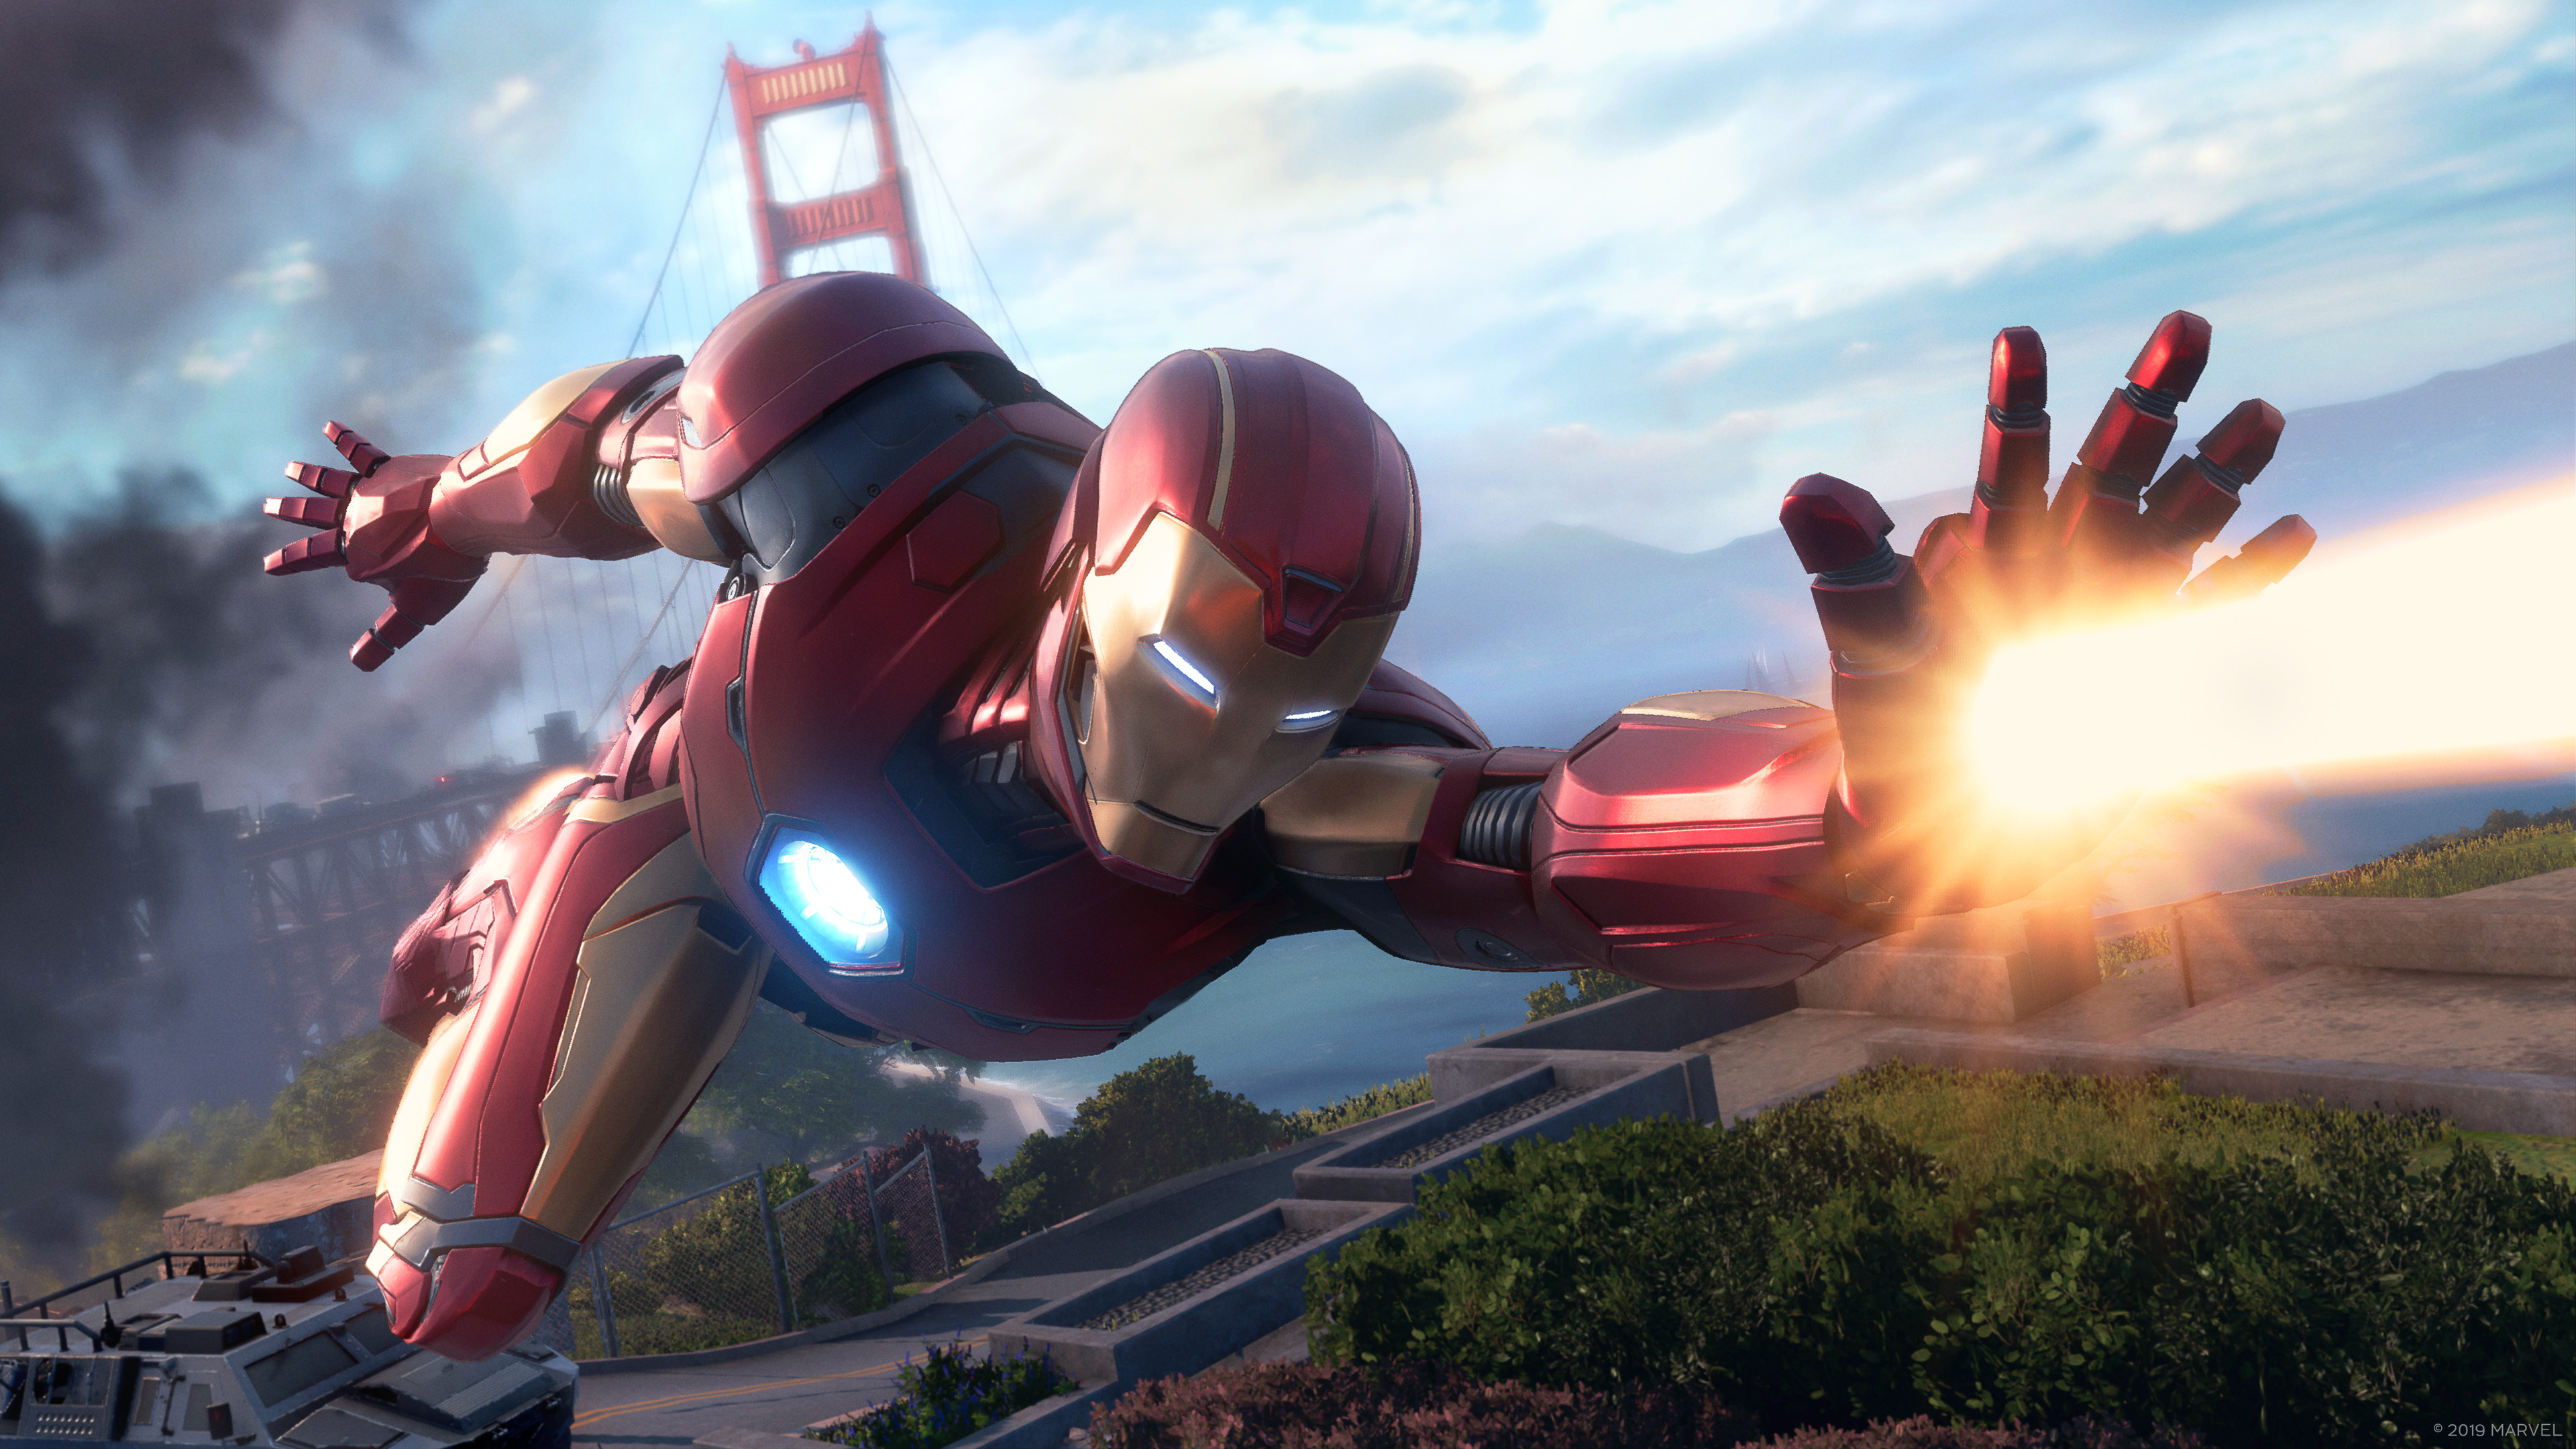 Marvel Entertainment and Motive Studio team up for an all-new Iron Man  video game